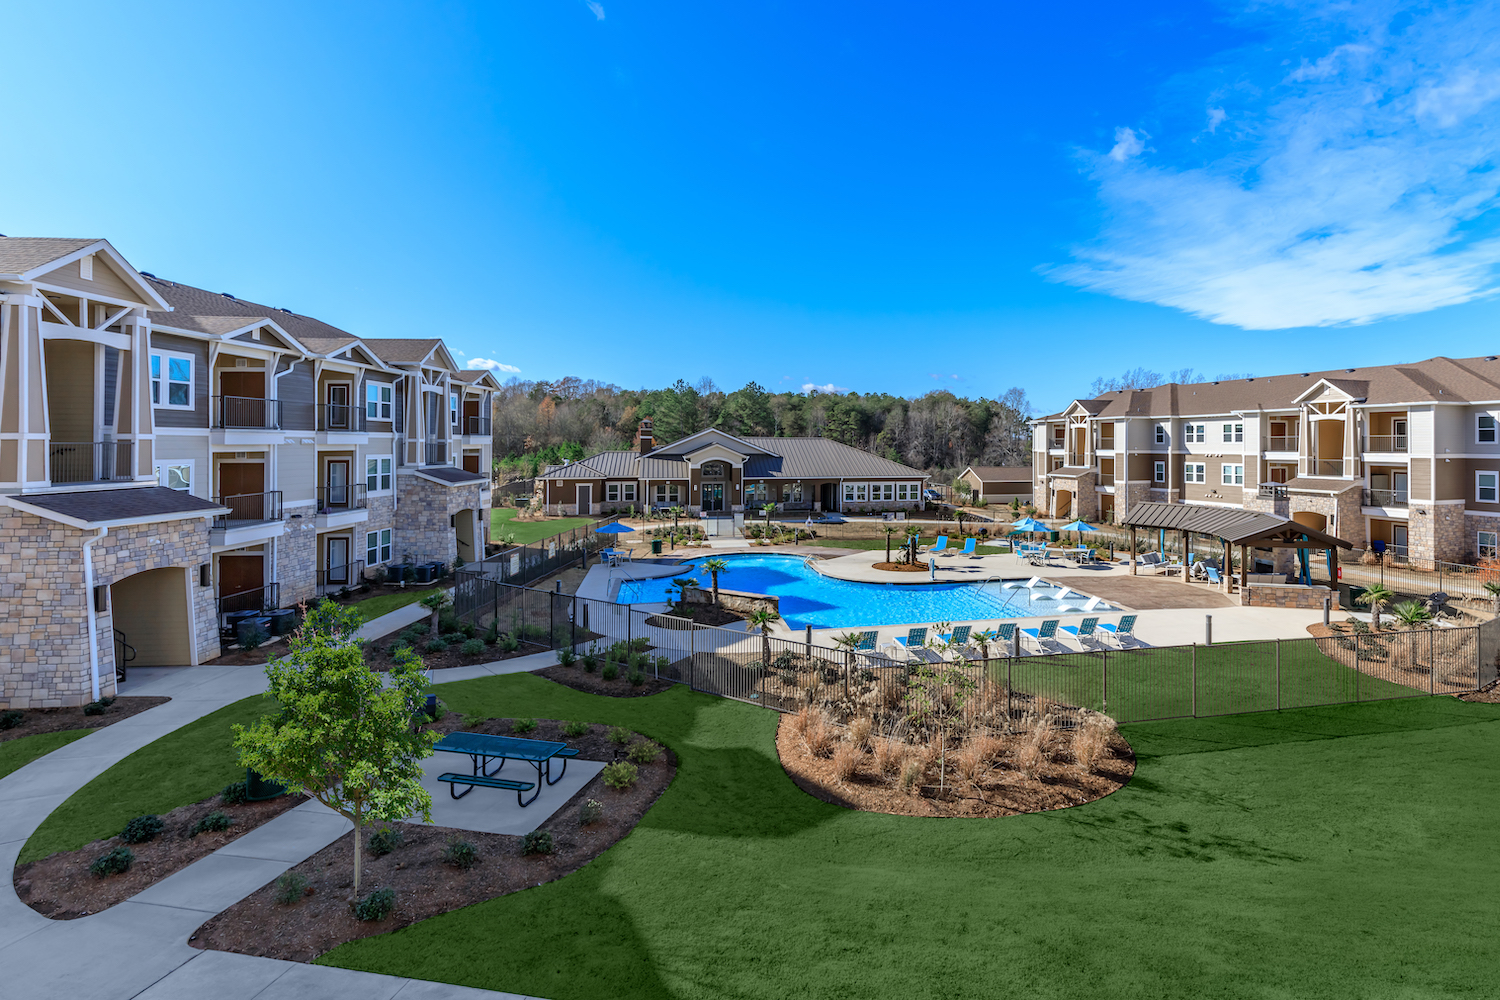 RK Properties Buys South Carolina Multifamily Property for DST Offering